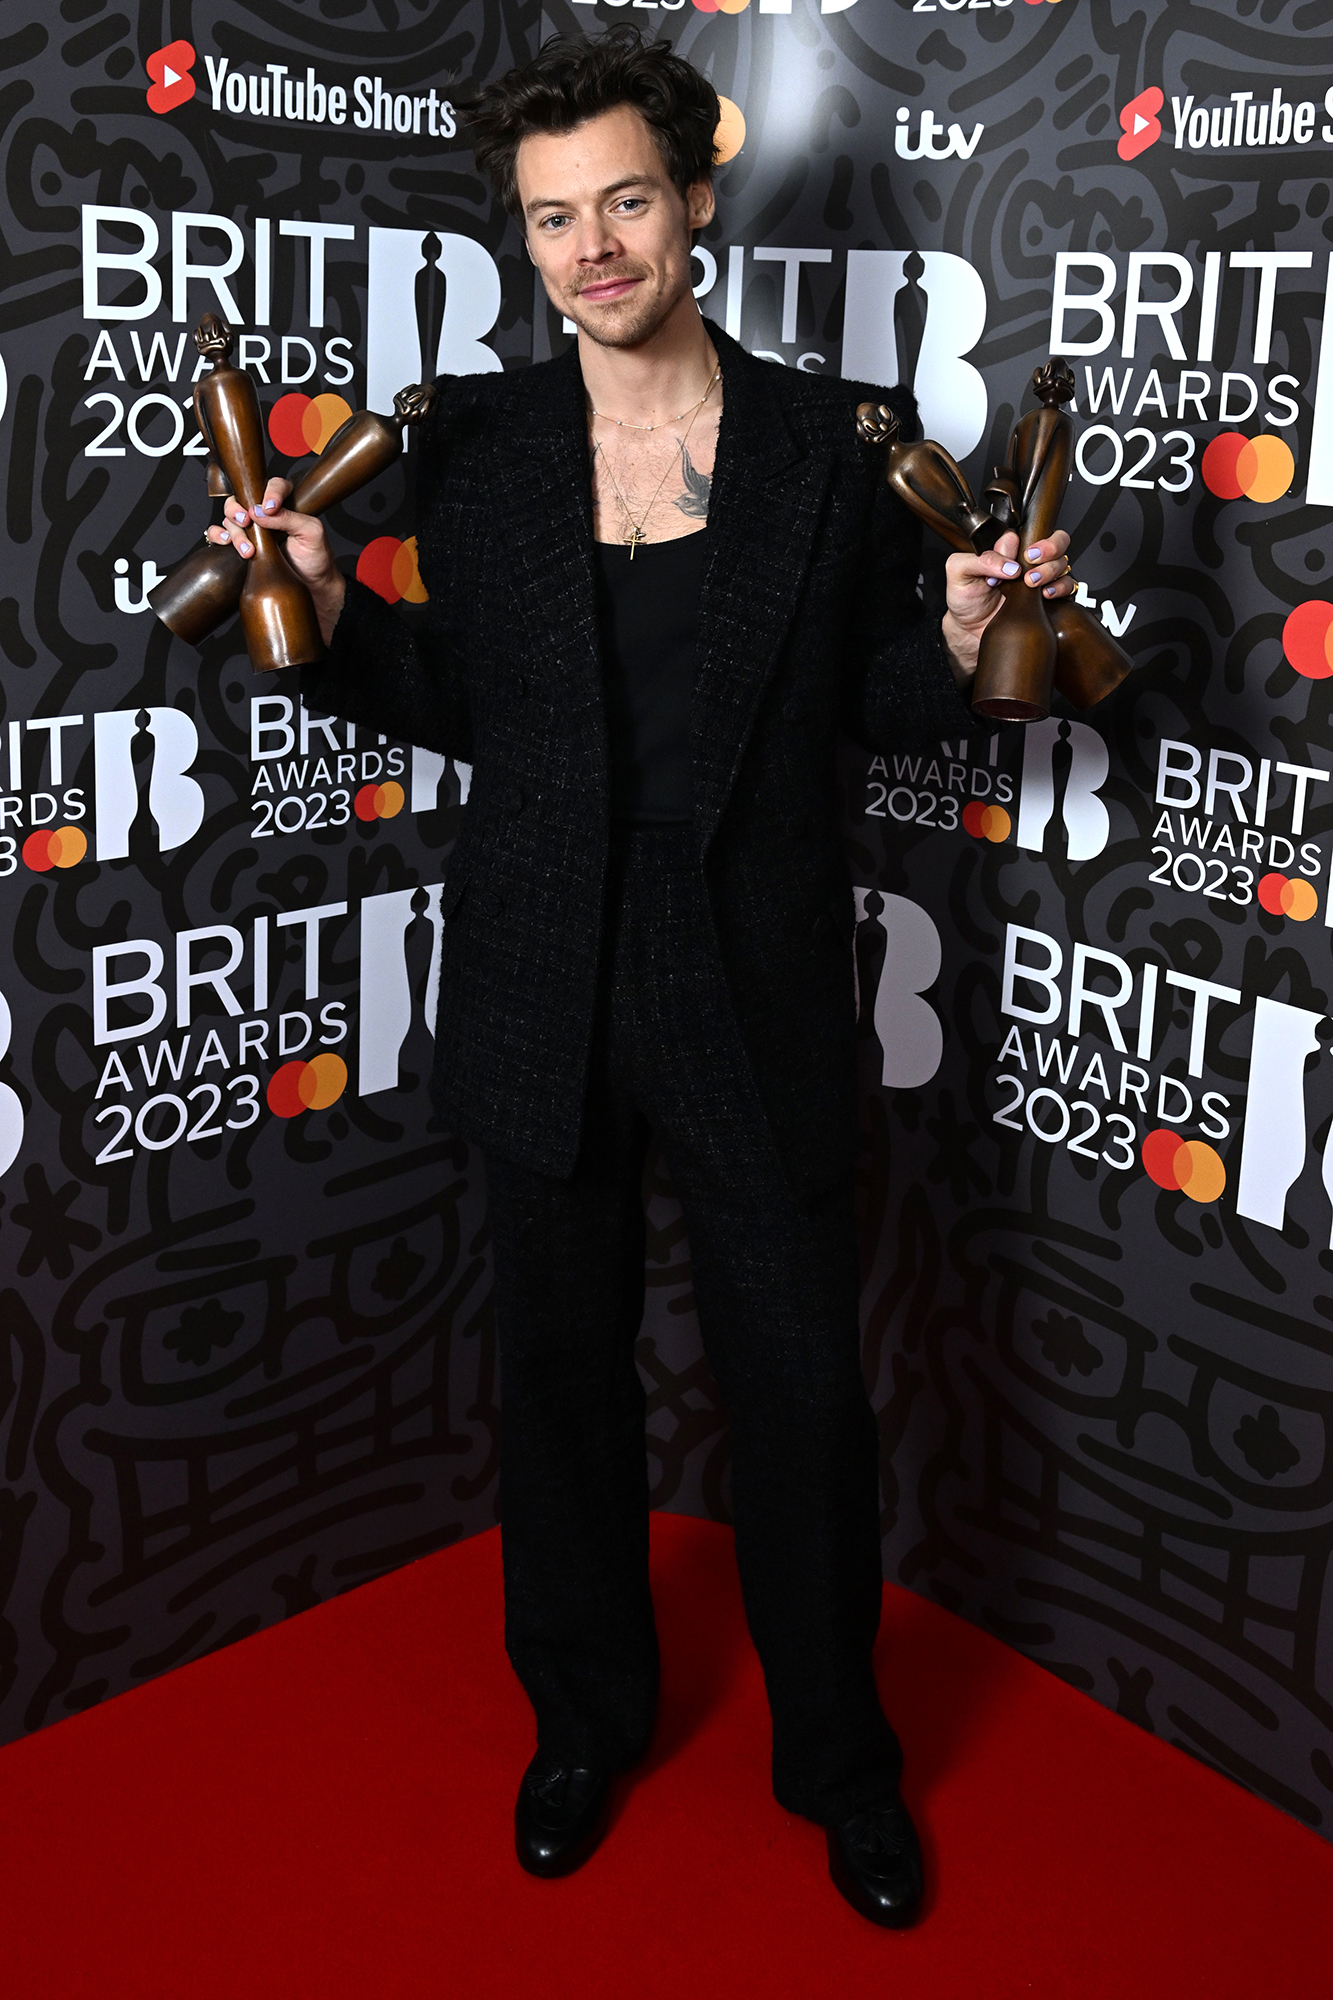 Brit Awards 2023 Harry Styles' Best Moments, Stylish Outfits